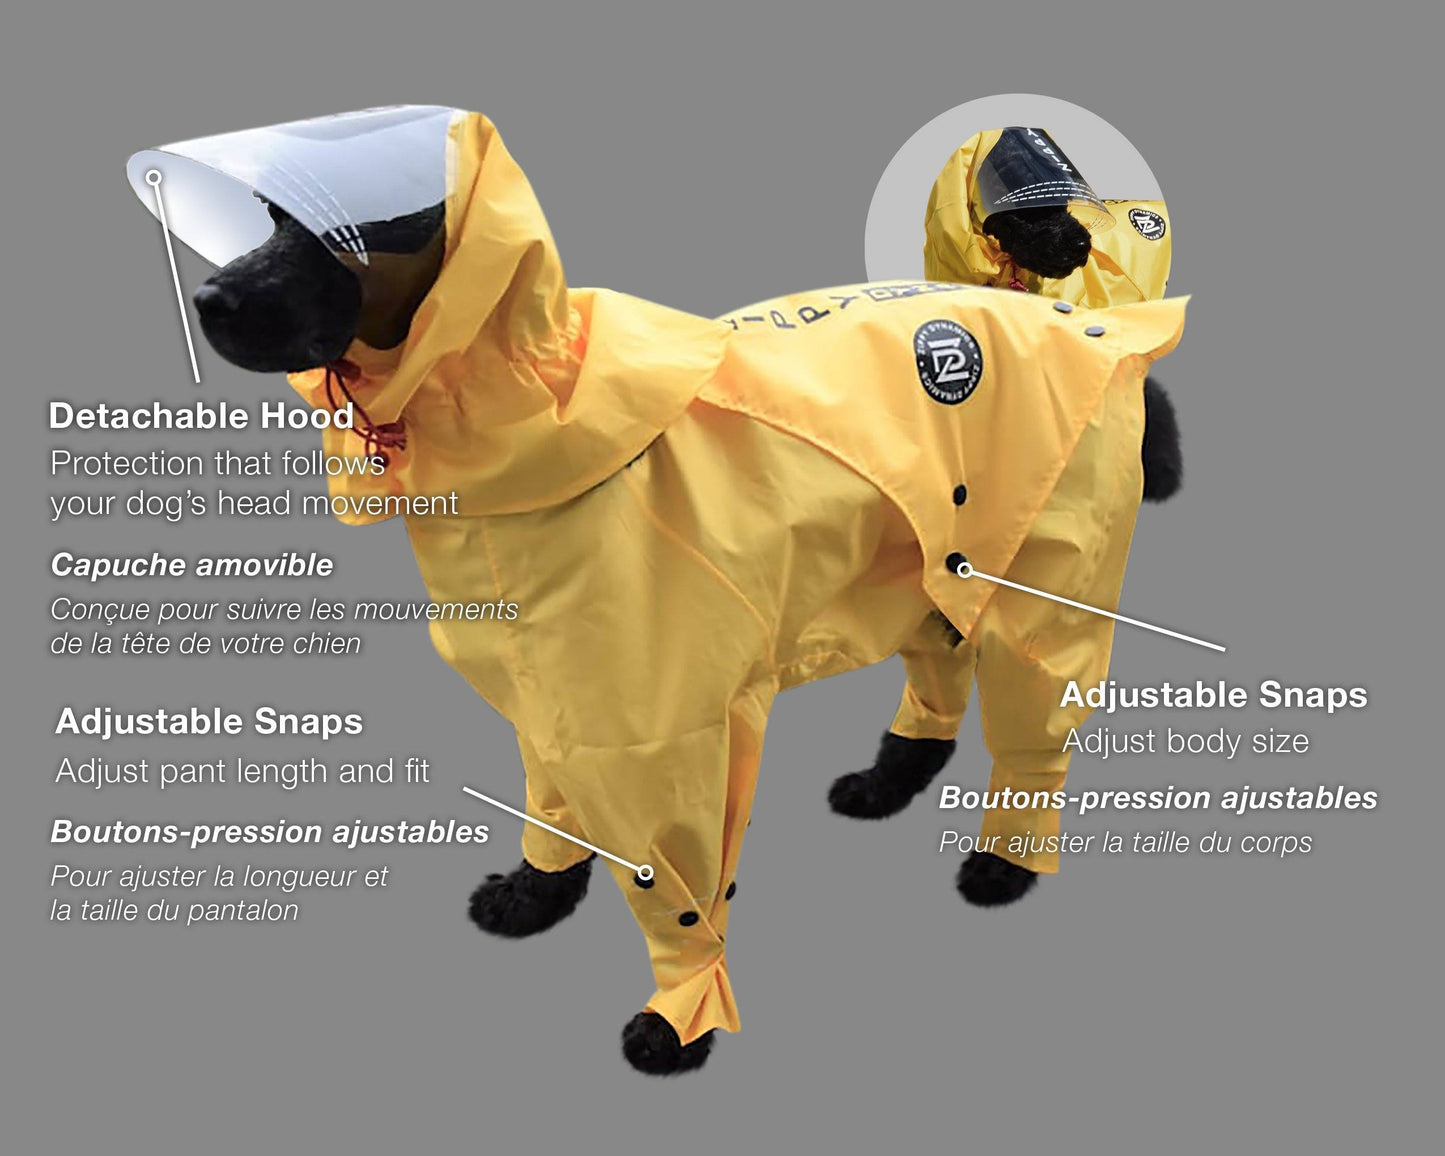 Rainy Collection is the perfect solution for keeping your puppy dry and comfortable. Our collection is designed to help protect your four-legged friend from the elements, while providing a fashionable and sophisticated look. Made with waterproof and breathable fabric, your pup will love their new outdoor look.10% OFF @ CHECKOUT 